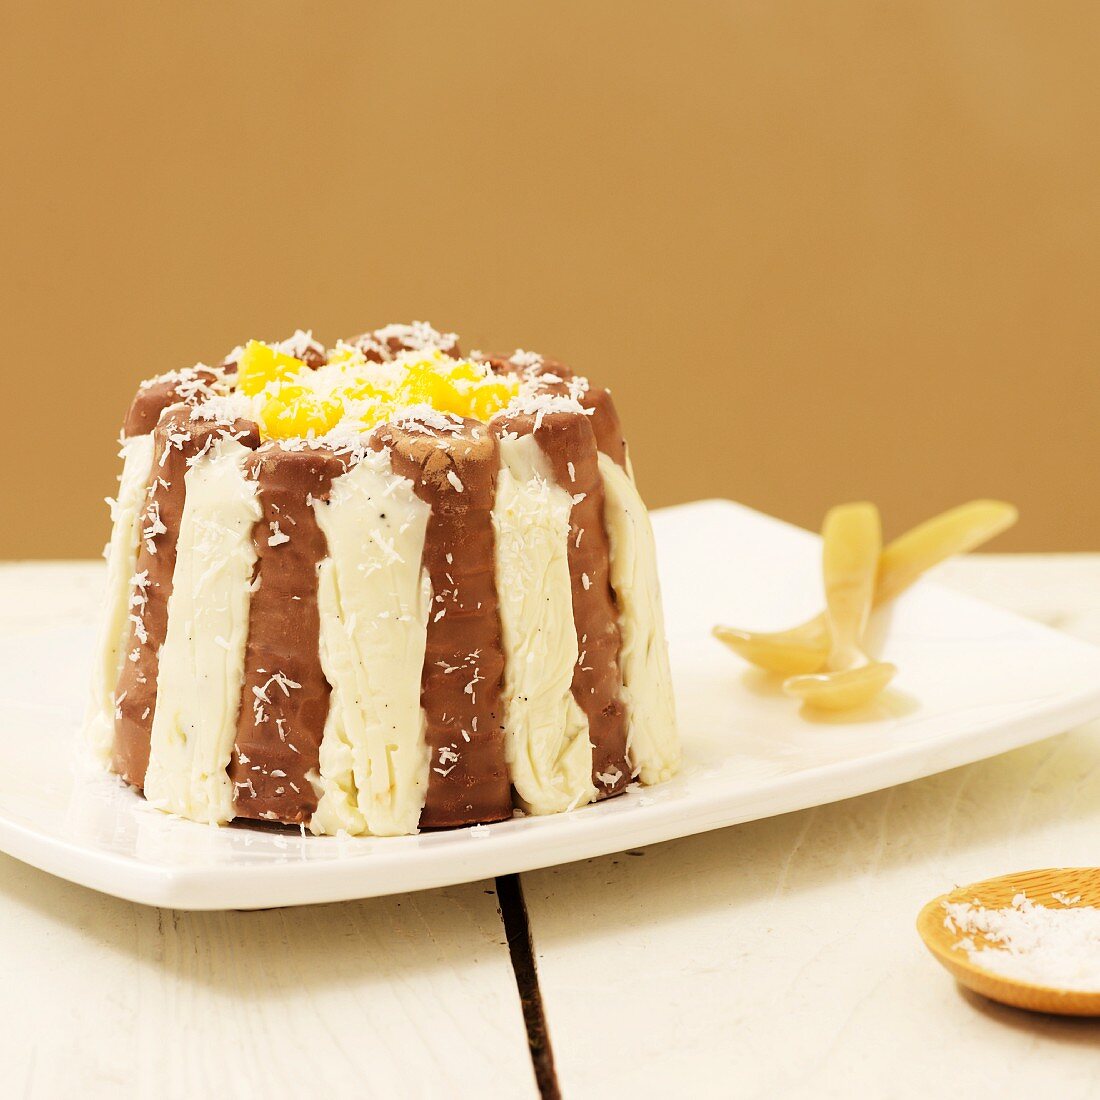 Chocolate charlotte with coconut, mango and pineapple